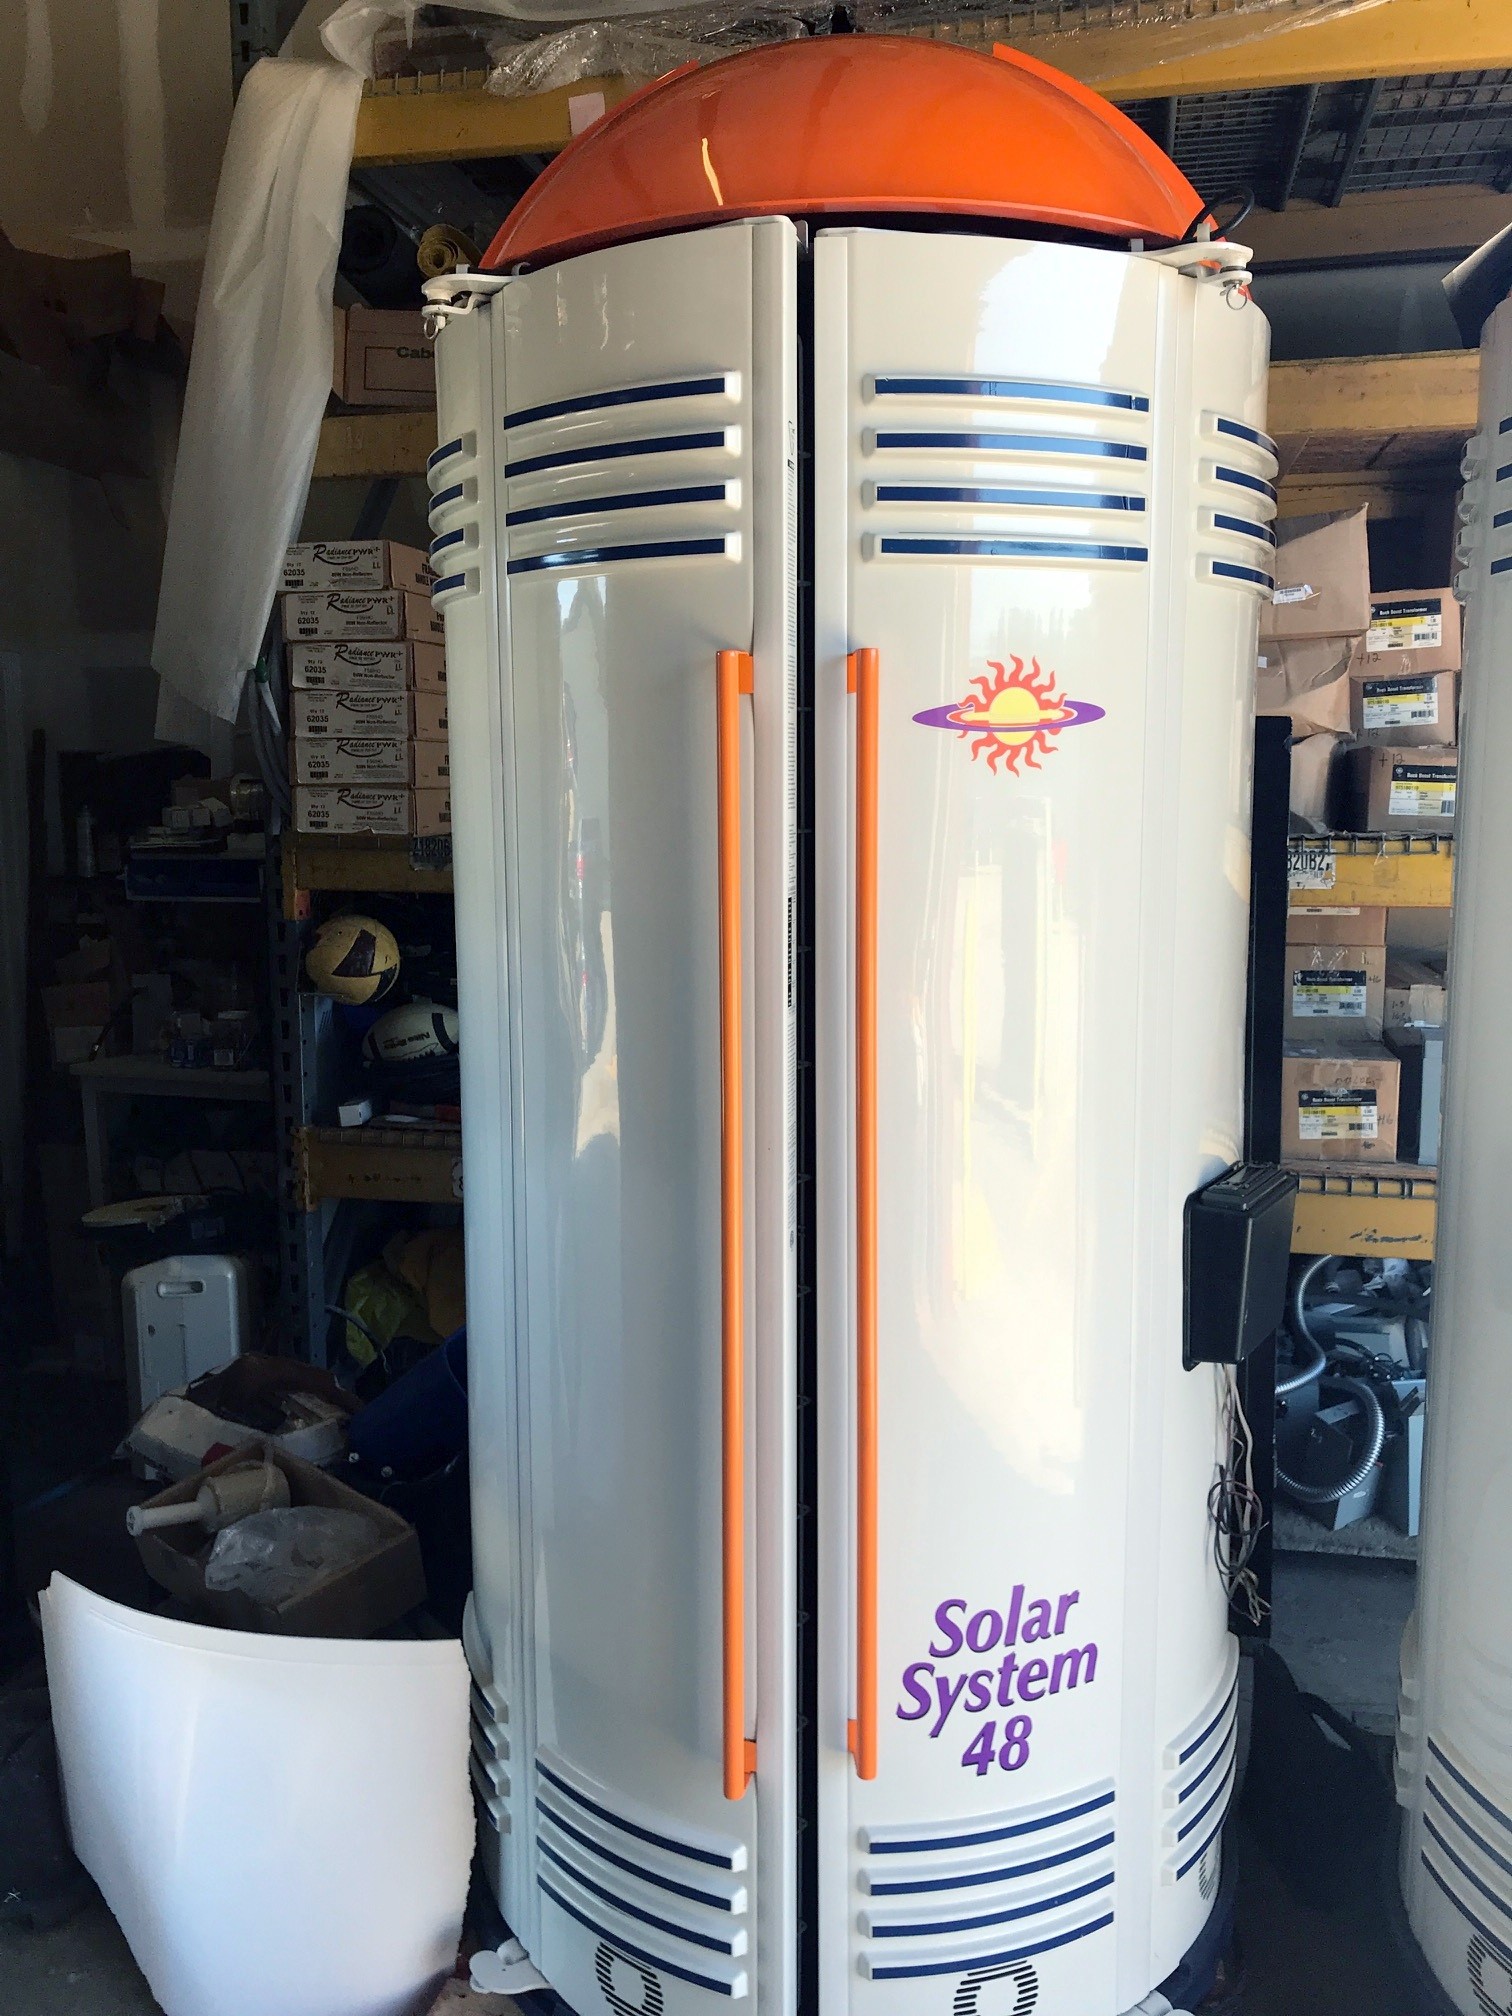 Wolff Tanning > Used - Stand Up Booths > 2003 Sundome XL48 Solar System VIP48 Tanning ...1512 x 2016